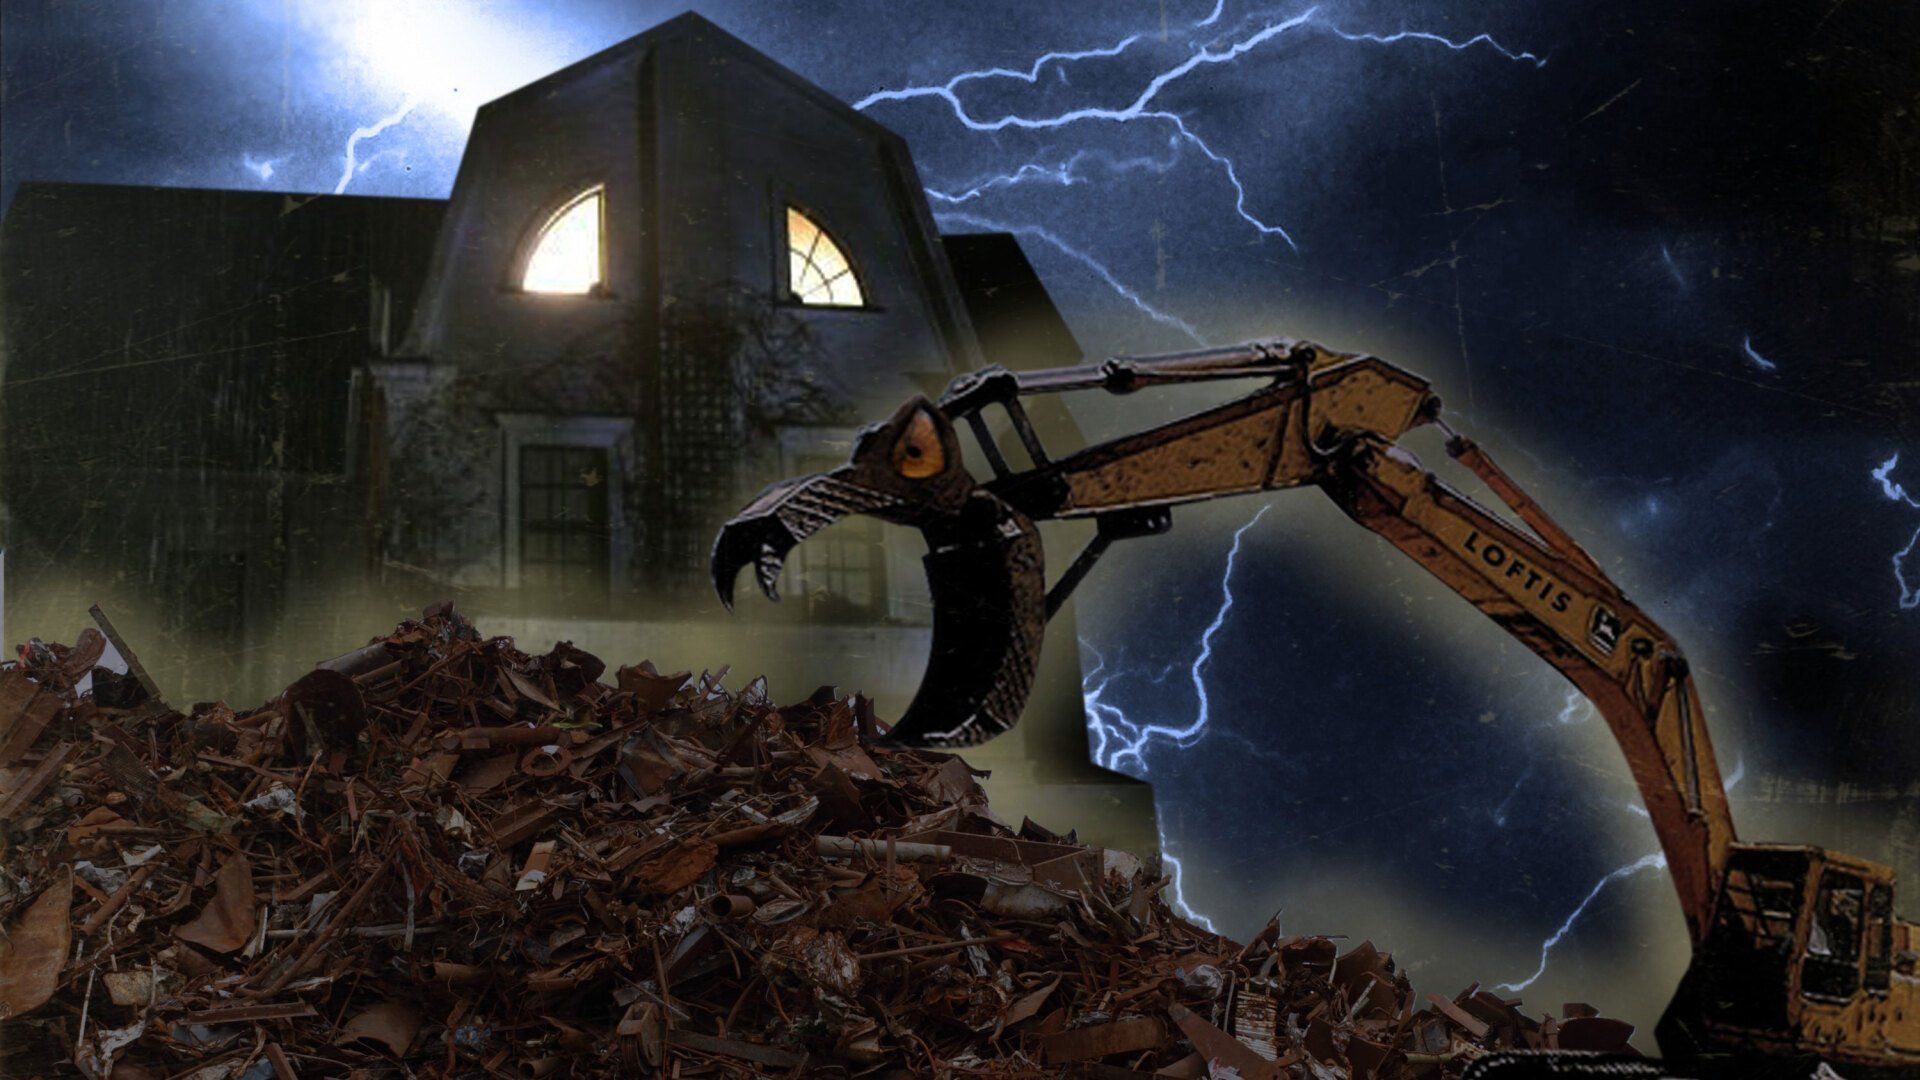 The Loftis Company Offers Demolition Services That Are Scary Good!